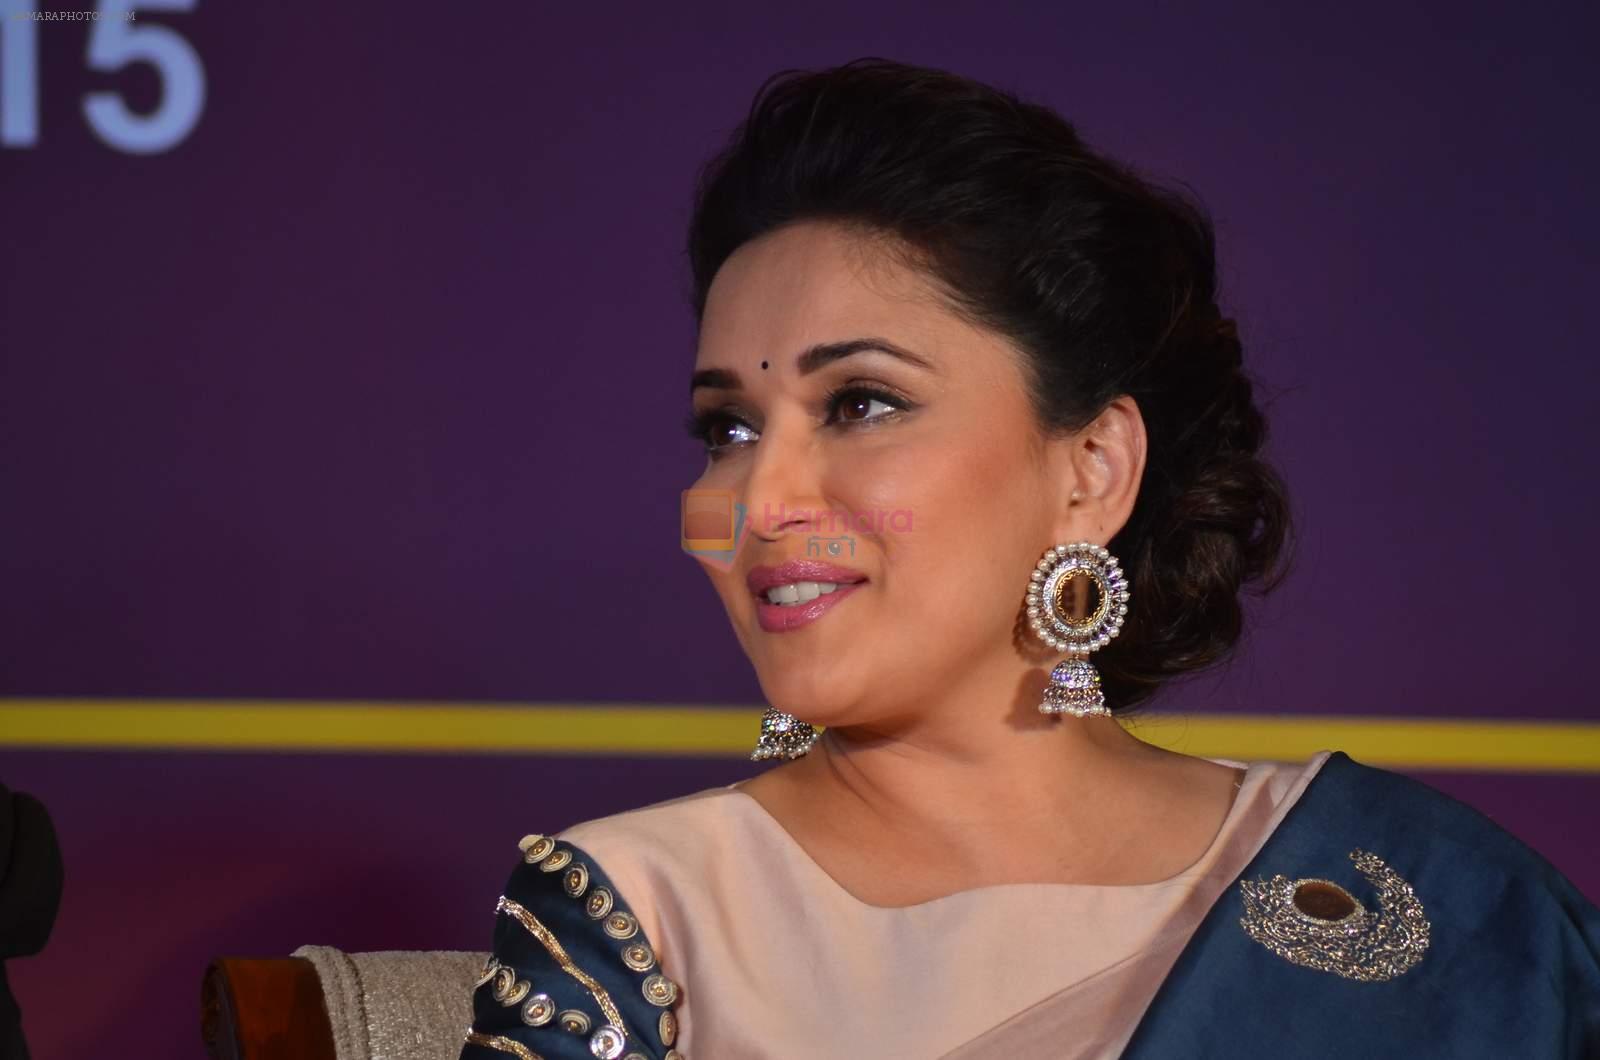 Madhuri Dixit at Unicef event in Taj lands End on 7th Sept 2015